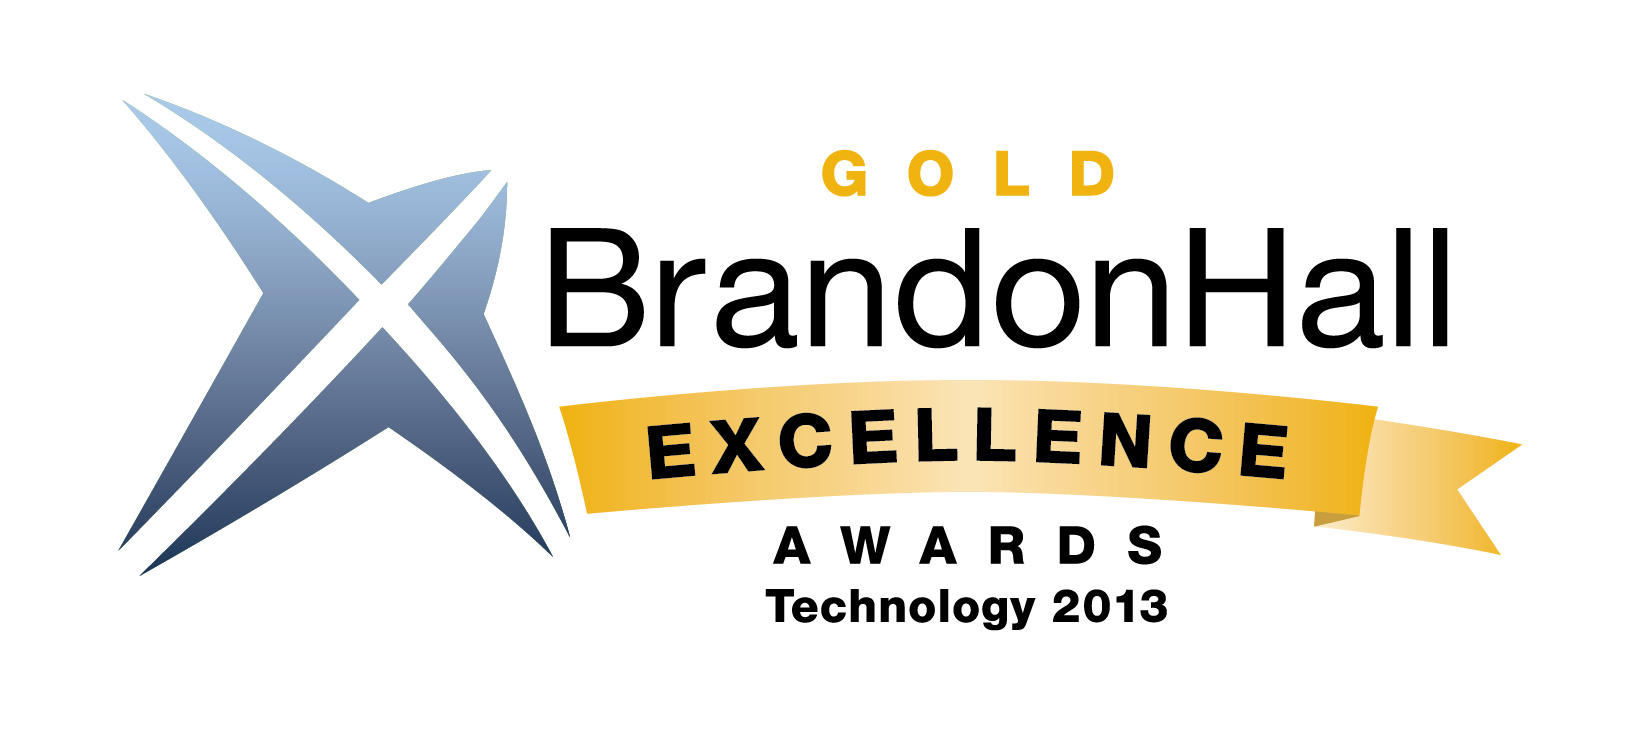 RiseSmart Wins Brandon Hall Group Gold Award for the Best Advance in Career Management or Planning Technology